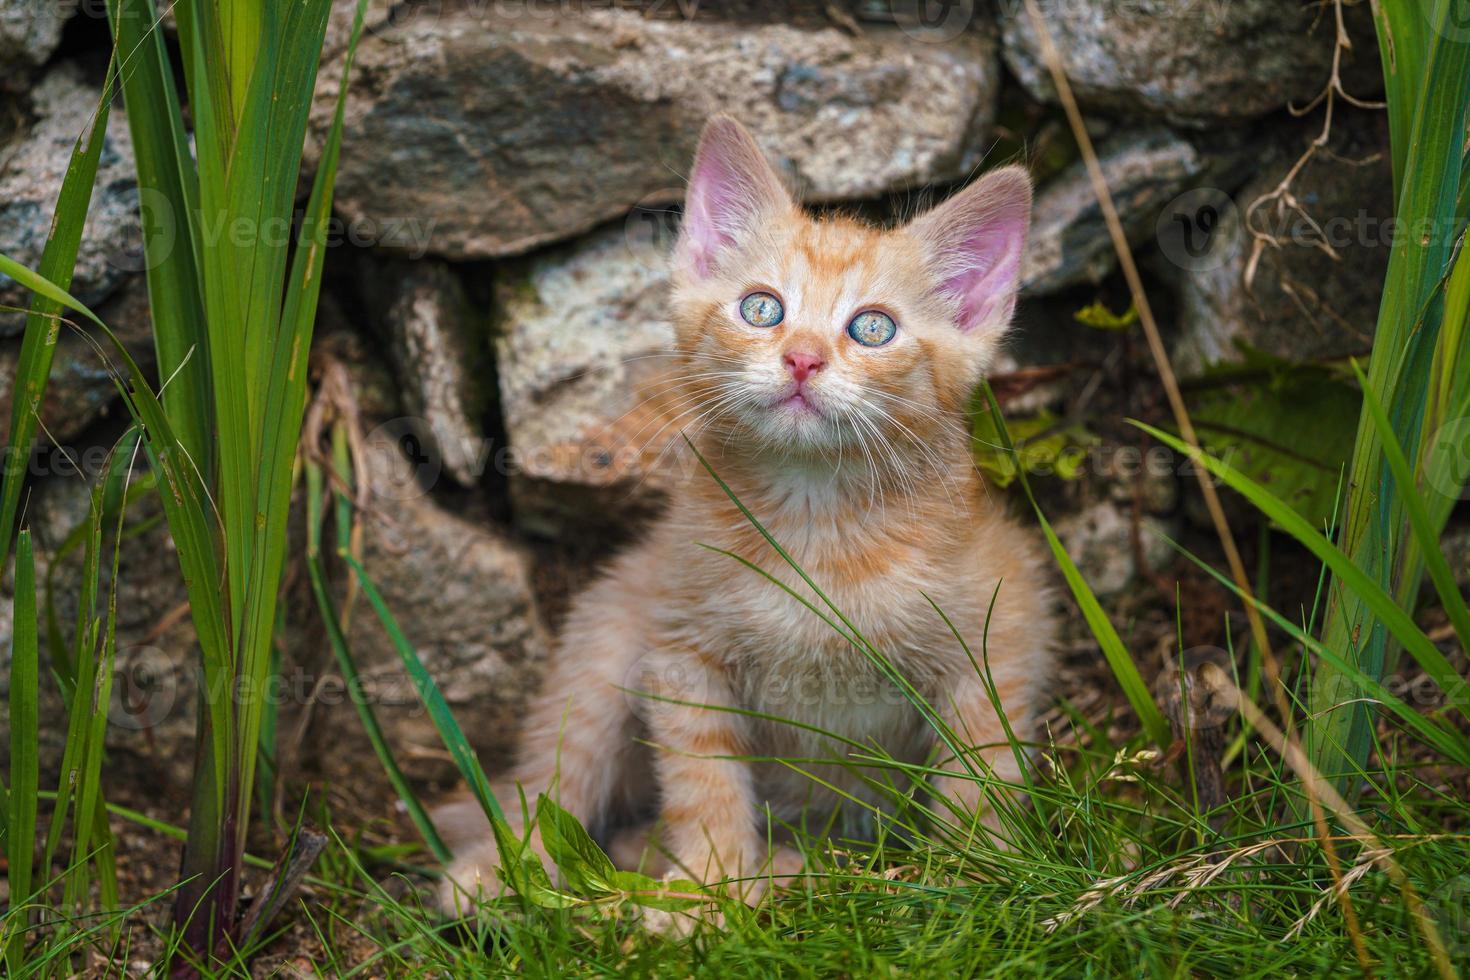 Cute little red kitten playing outdoors. Portrait of a red kitten in the garden. Tabby funny red kitten with green eyes and with big ears. Animal baby theme photo